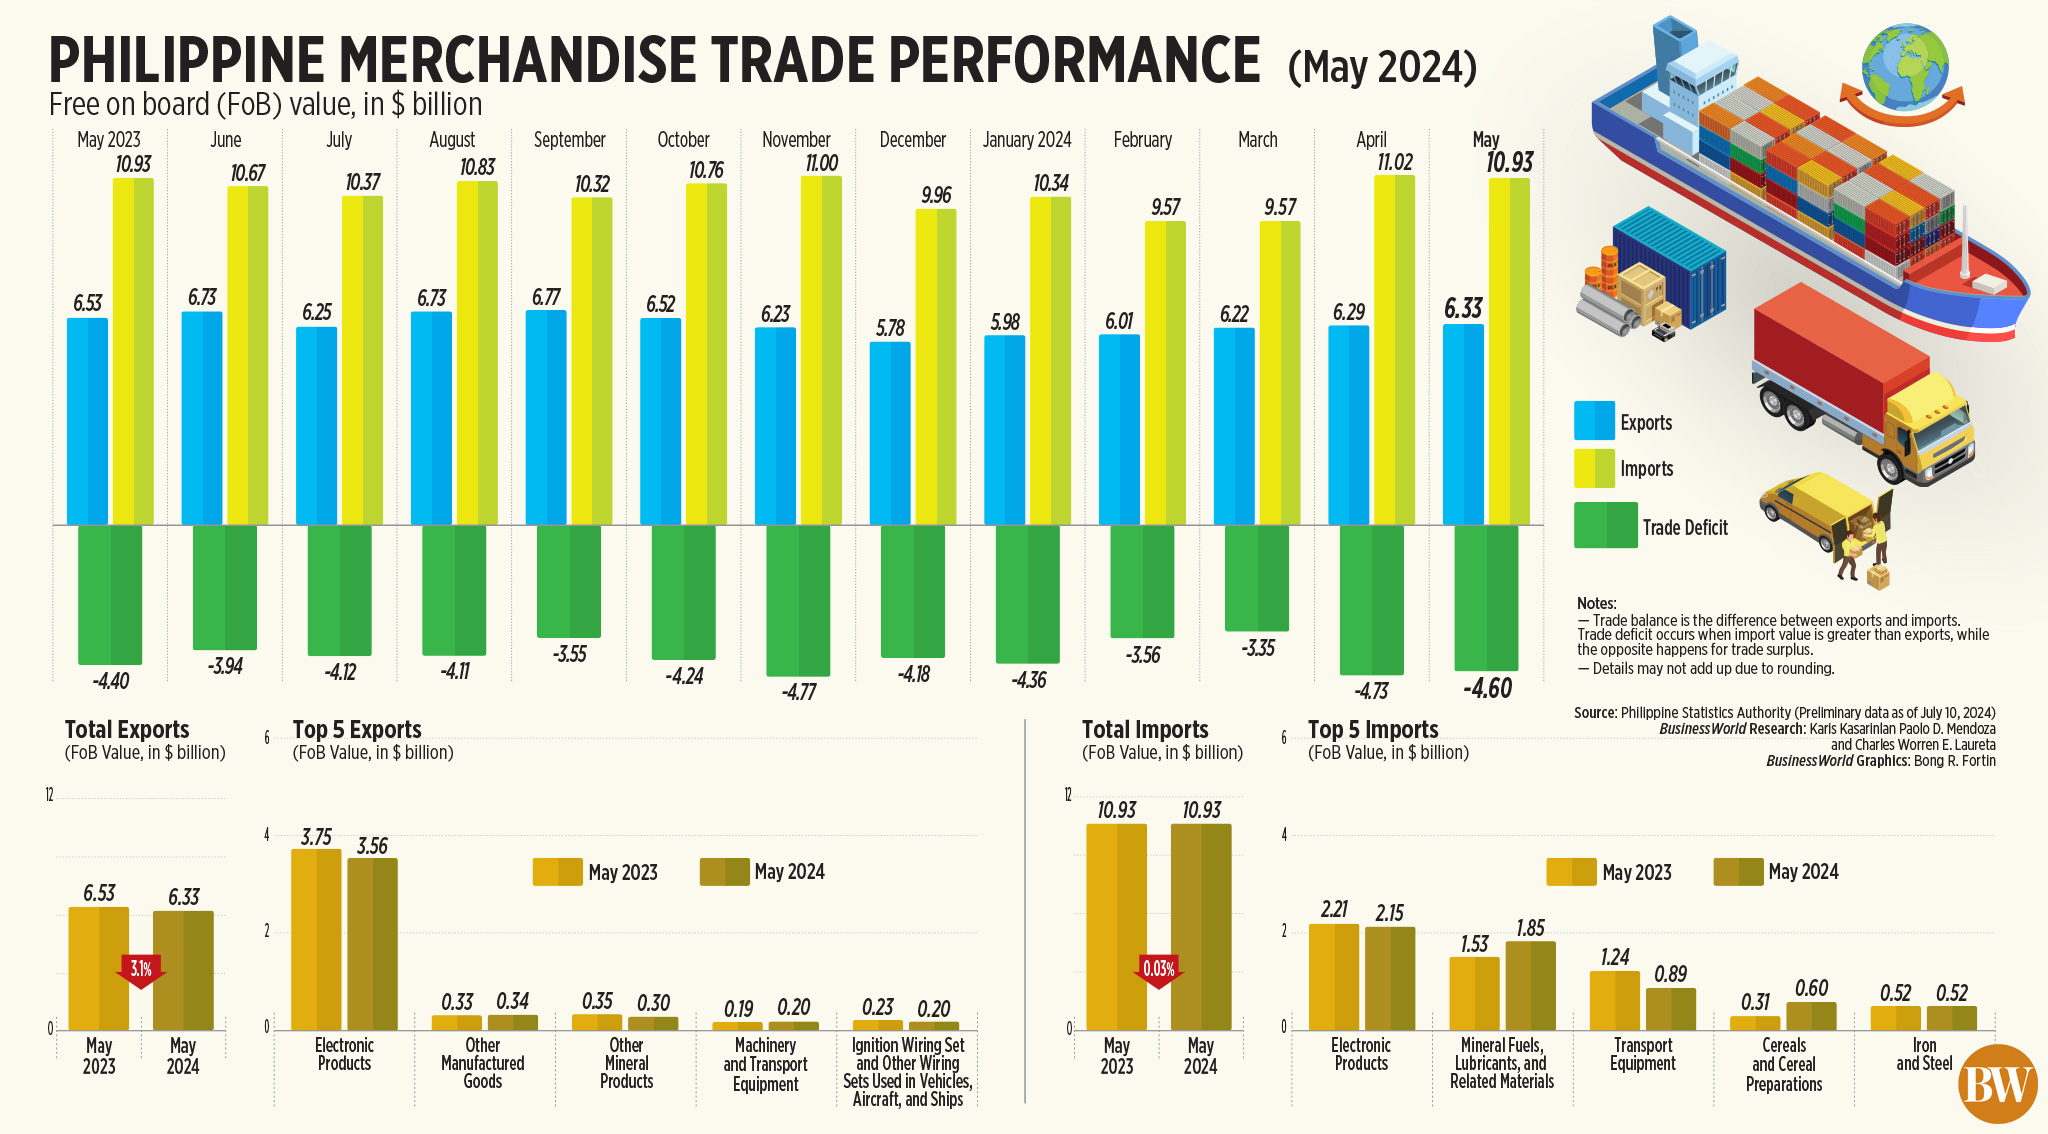 Philippine Trade Performance for Goods (May 2024)